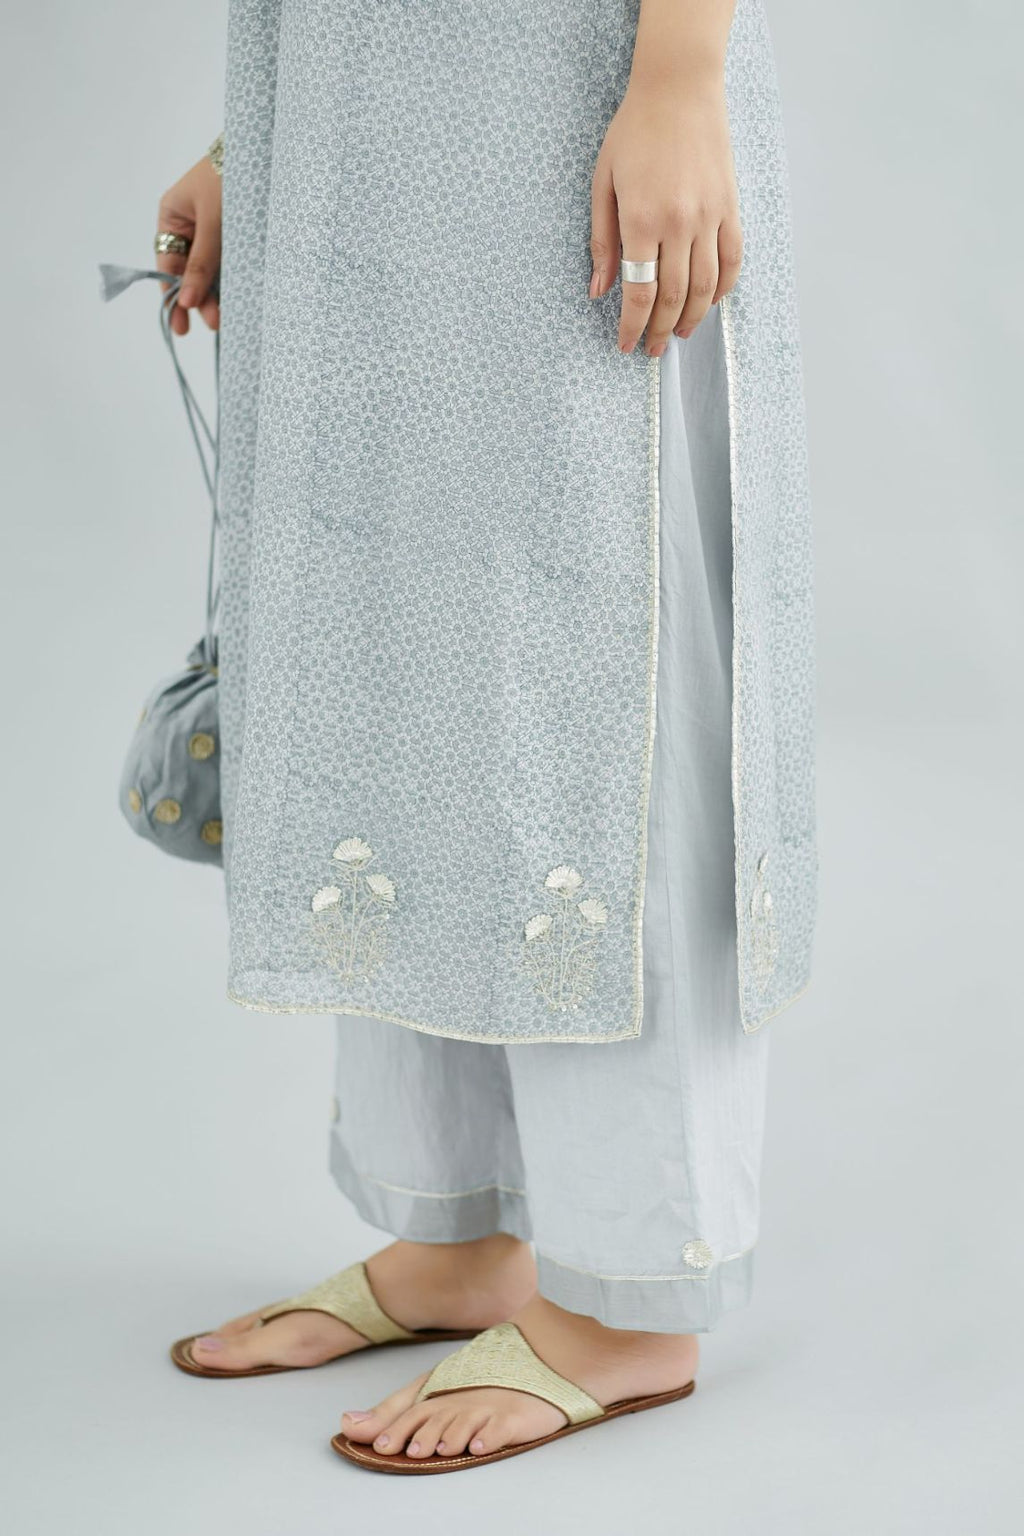 Steel blue hand block printed silk chanderi kurta with silver gota embroidery, paired with steel blue straight pants with gota and silk chanderi fabric detaling at bottom hem